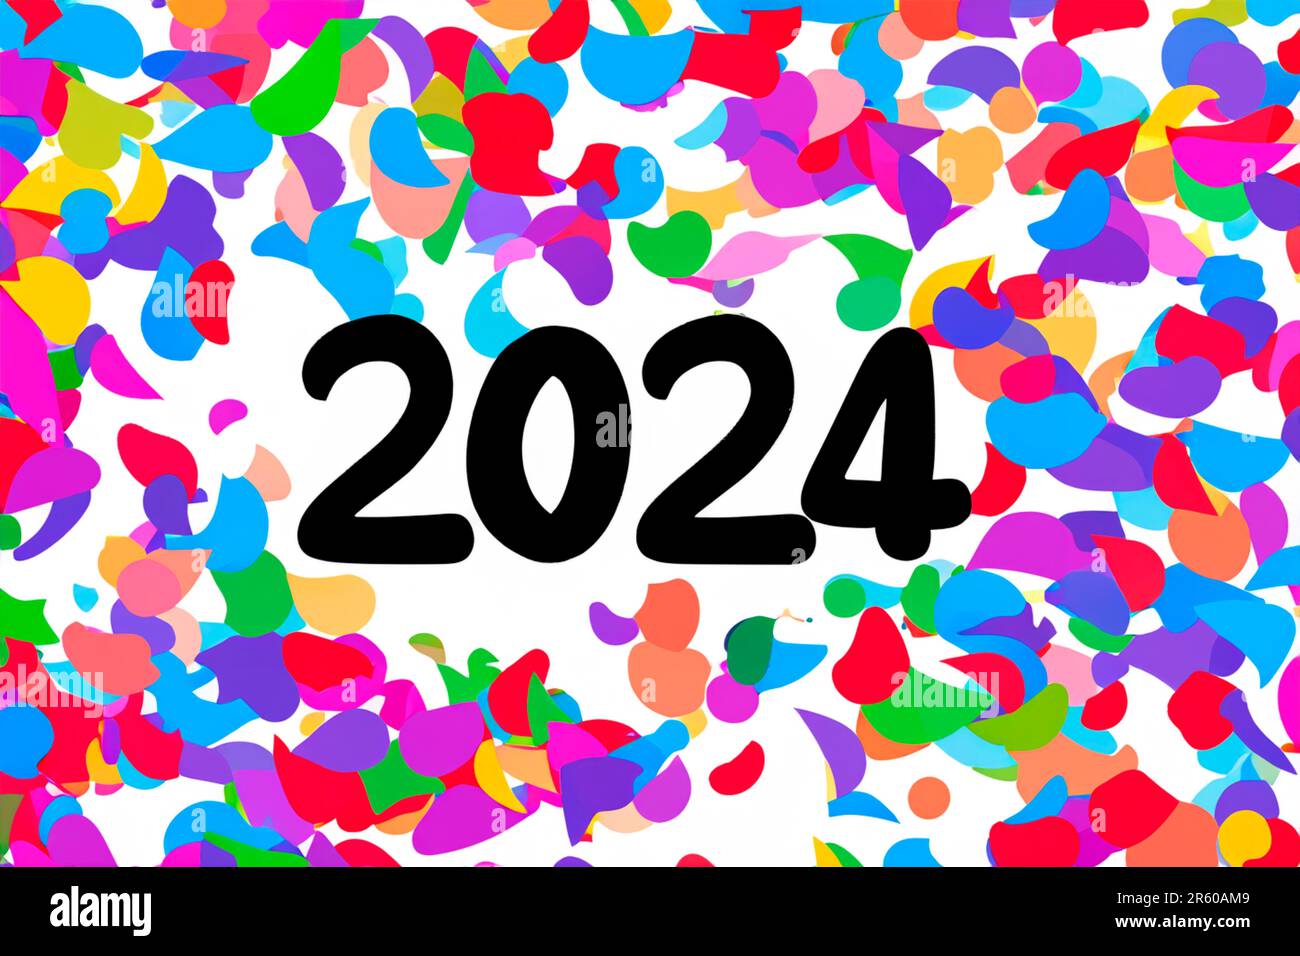 https://c8.alamy.com/comp/2R60AM9/2024-new-year-2024-numbers-on-a-background-of-confetti-horizontal-design-happy-new-year-2024-2R60AM9.jpg